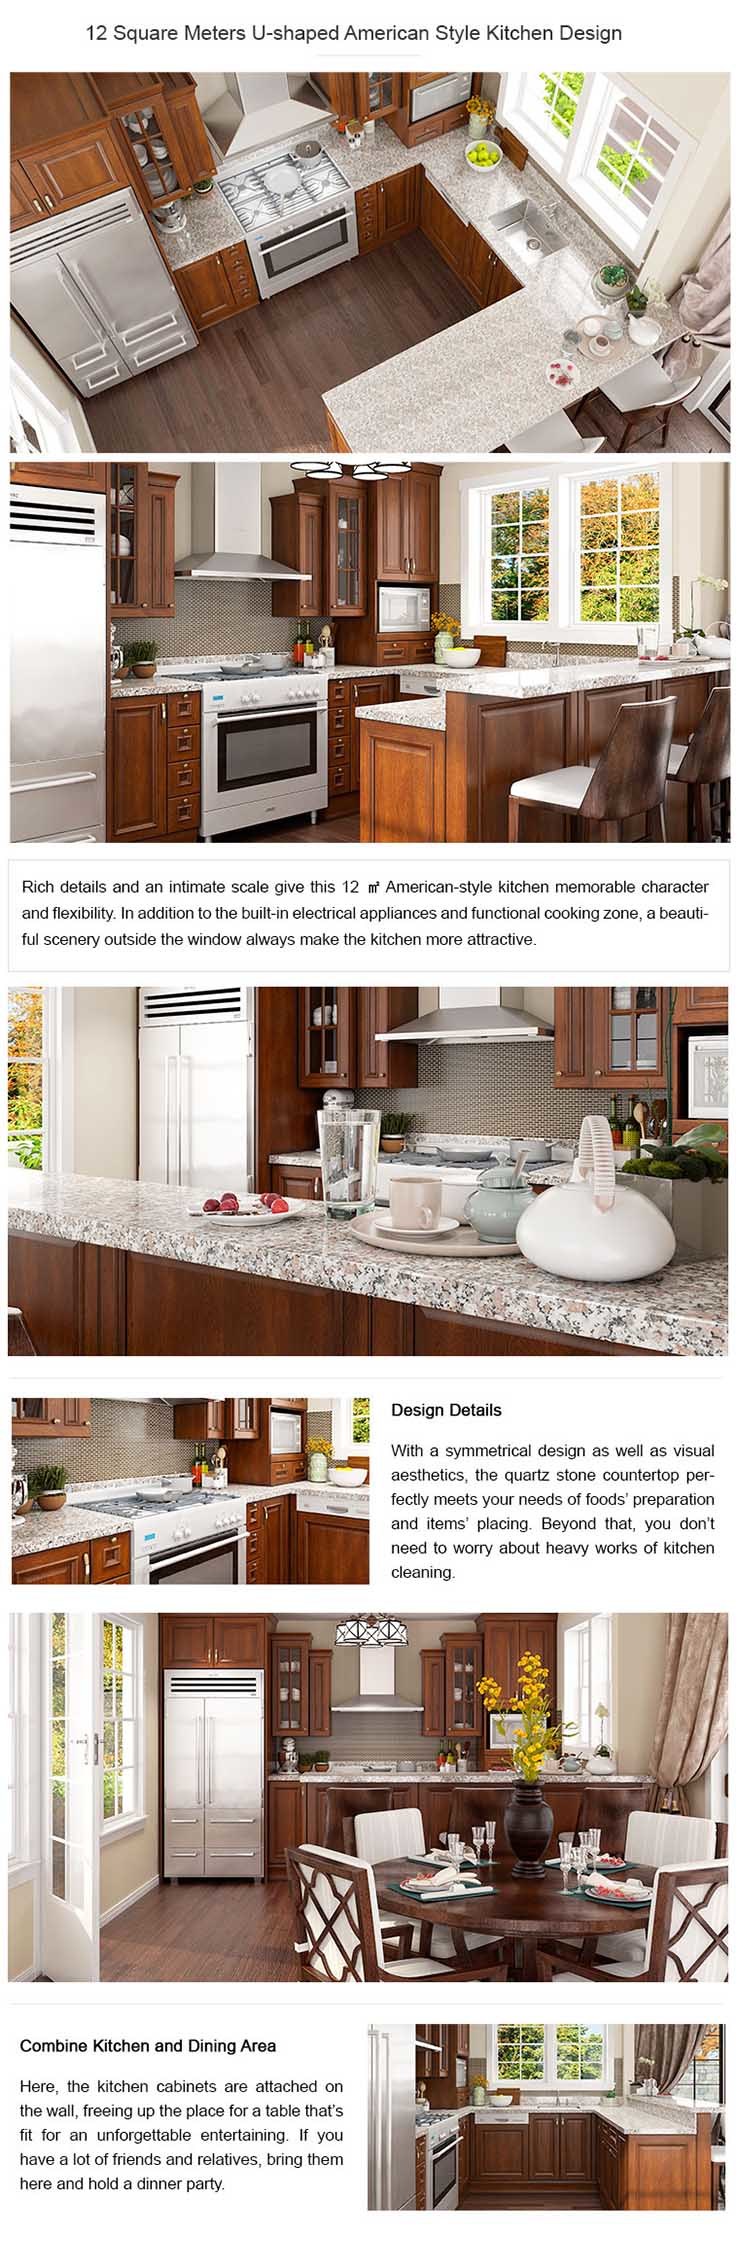 12 Square Meters U-Shaped American Style Kitchen Design (OP16-PP03)